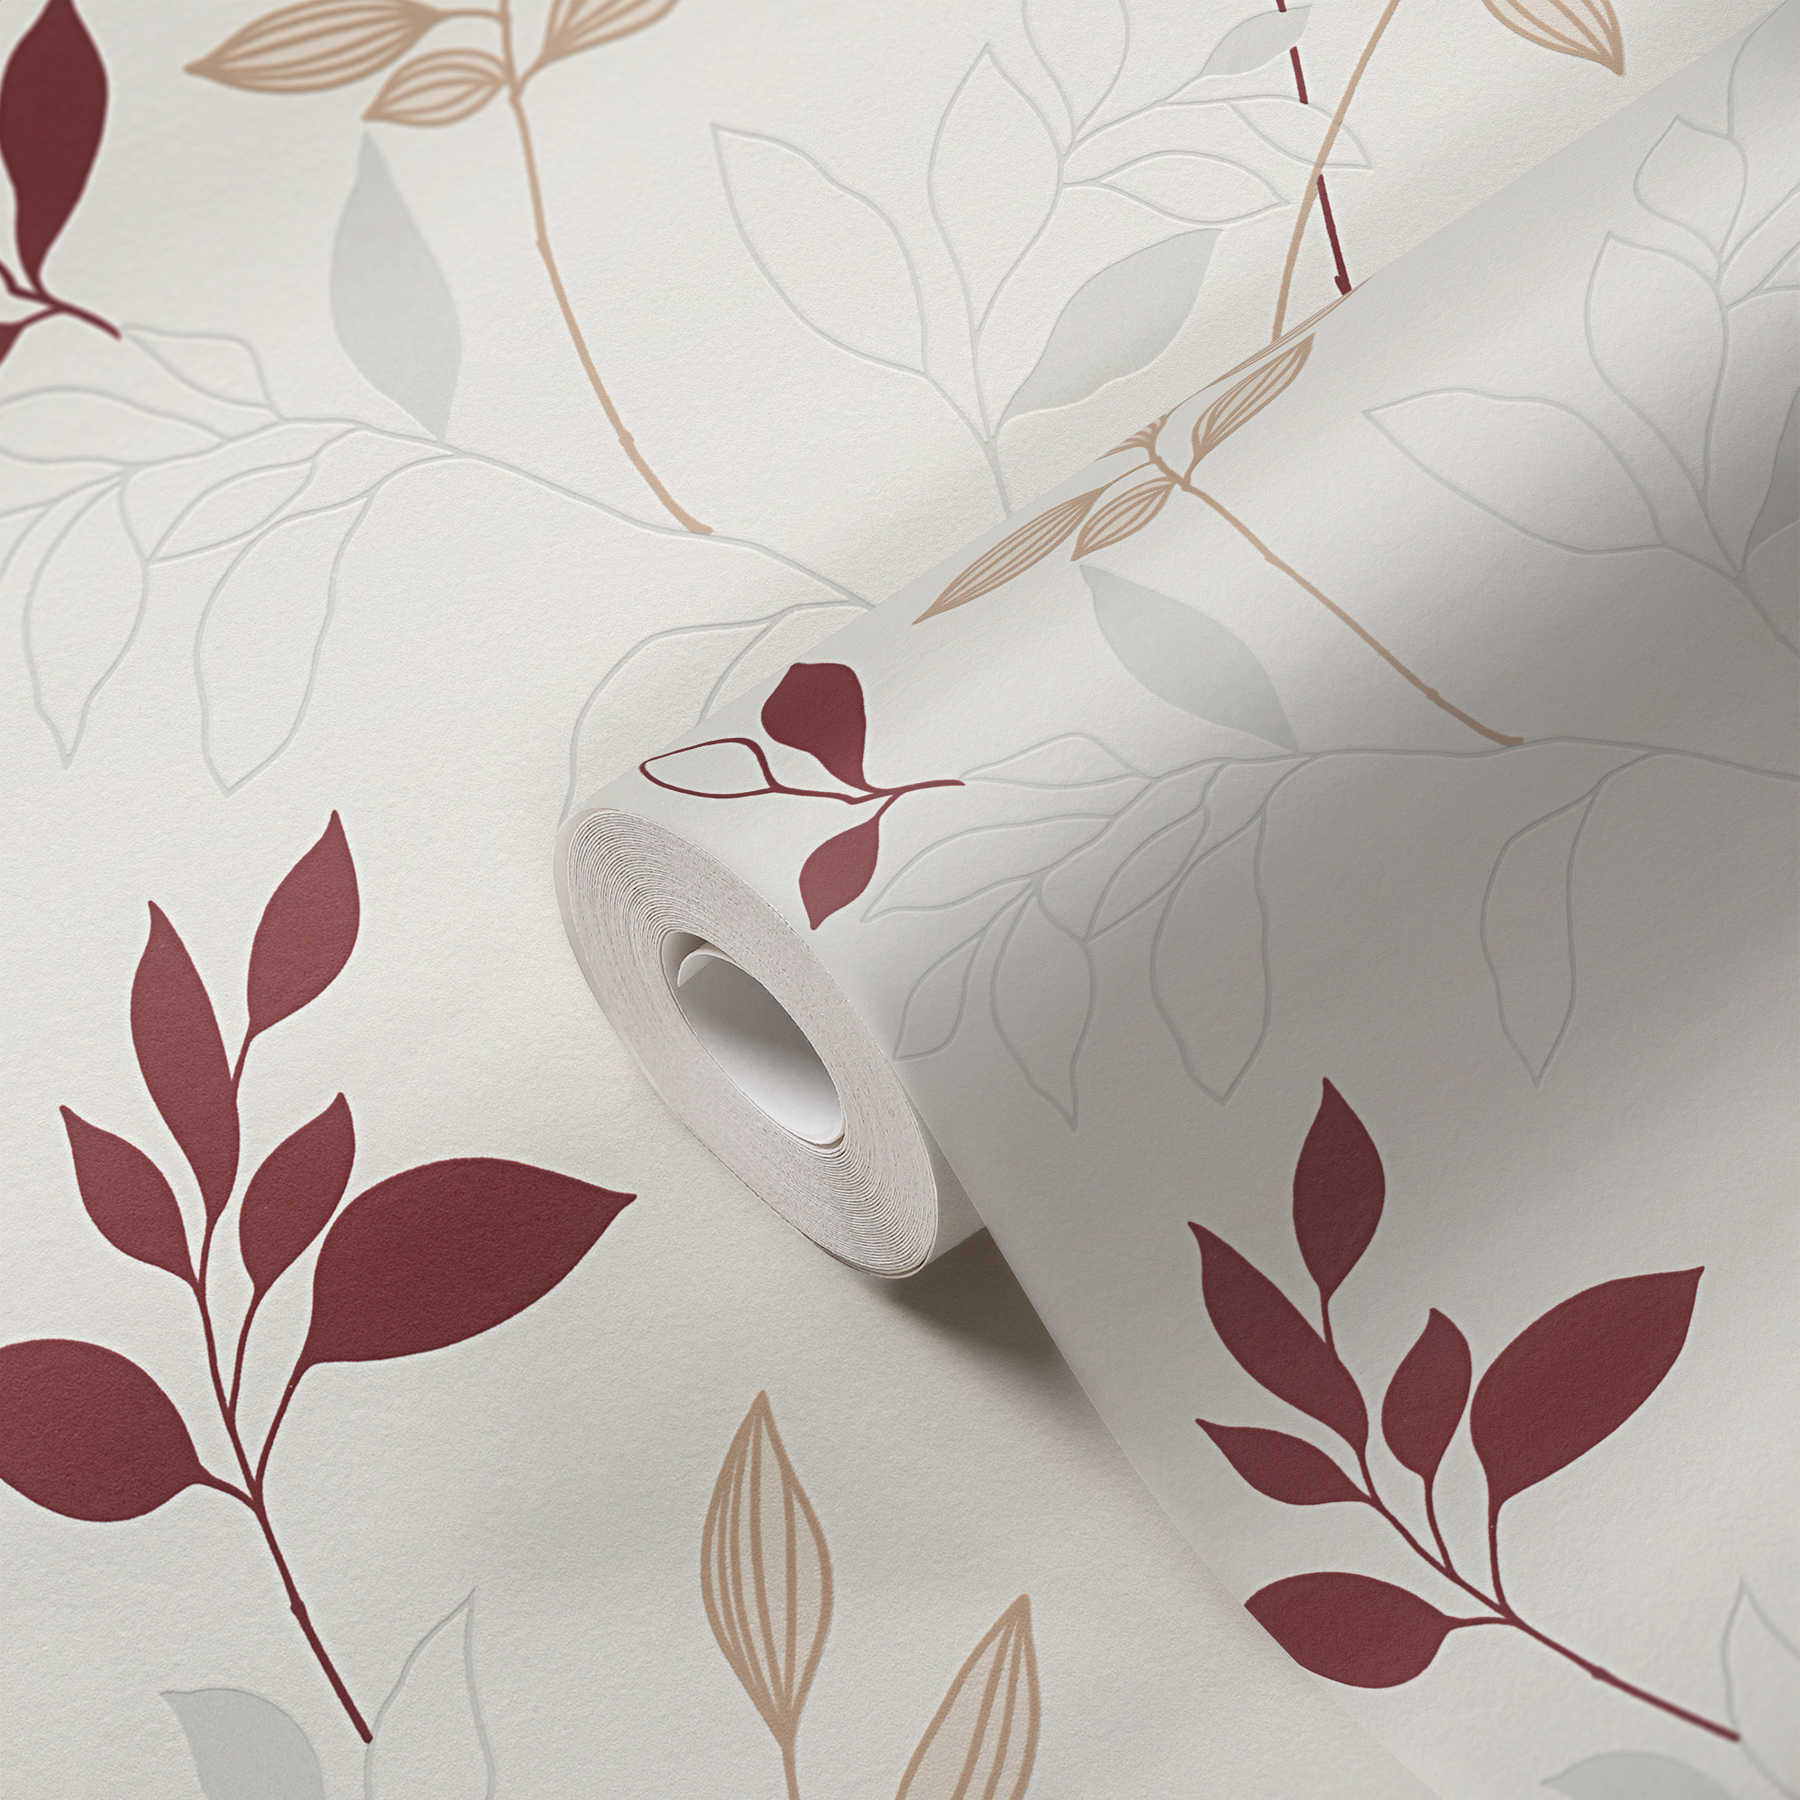             Wallpaper leaves pattern textured, coloured accents - red, cream
        